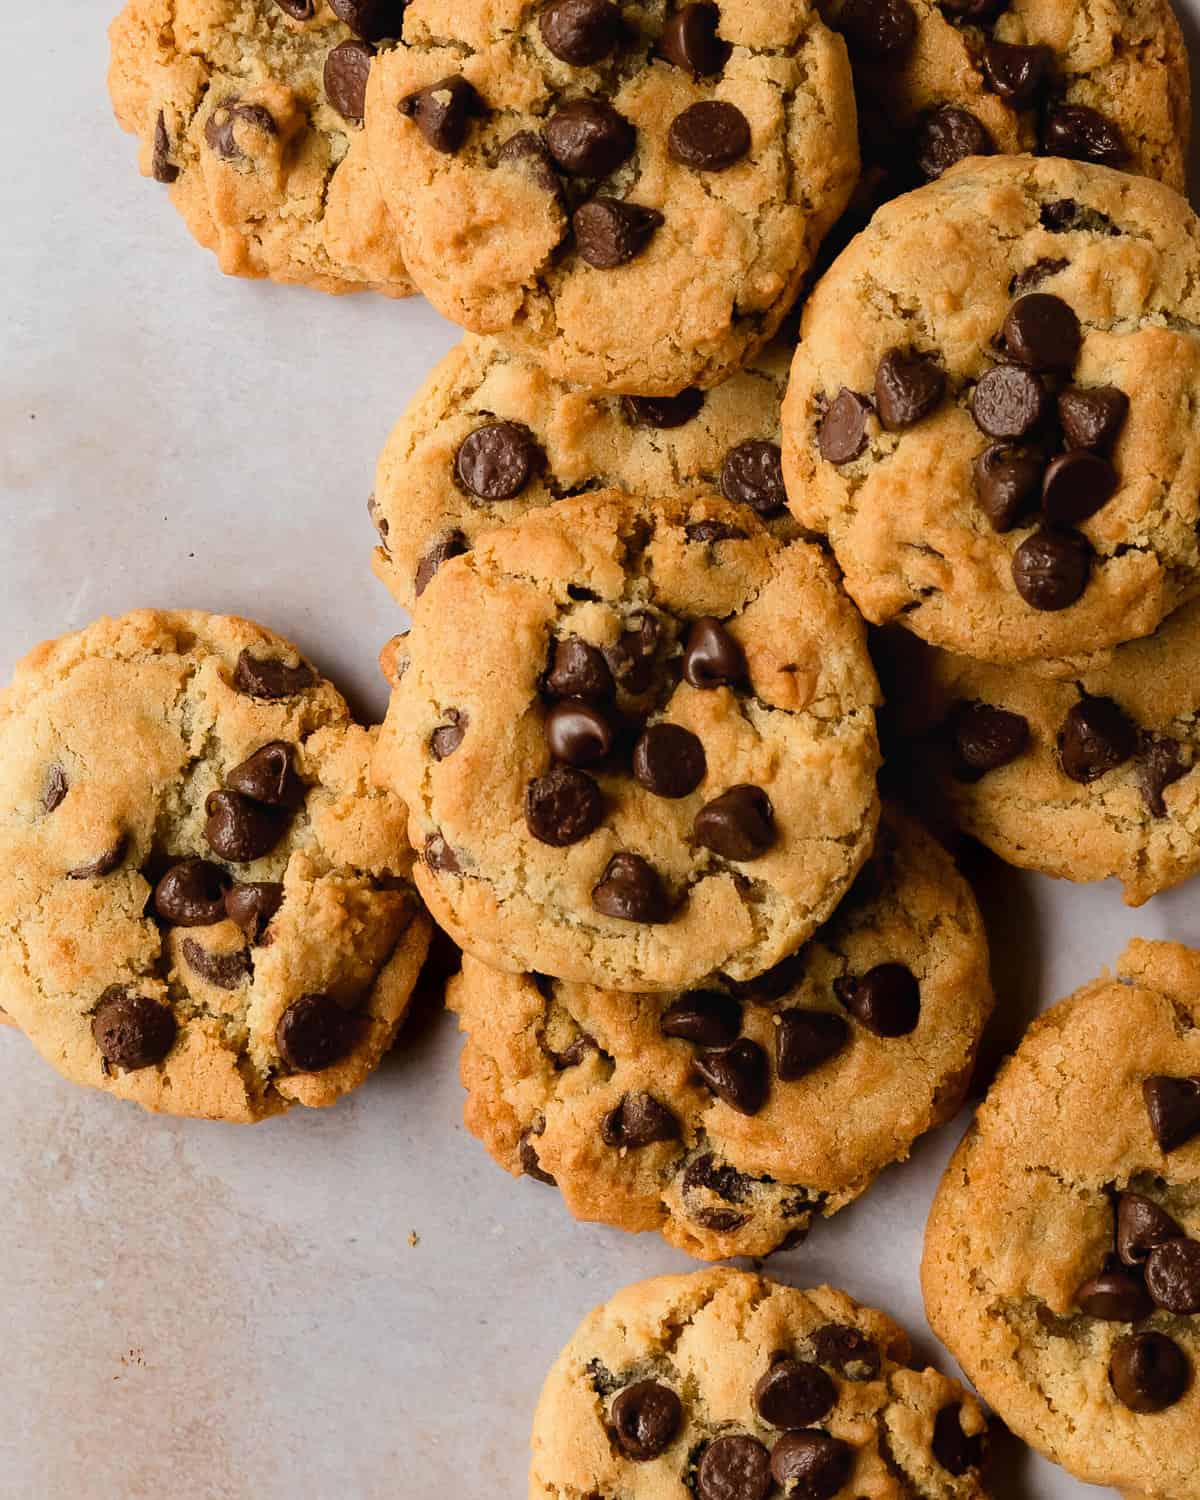 Air fryer chocolate chip cookies are classic chocolate chip cookies baked in an air fryer. These warm and buttery chocolate chip cookies in an air fryer are soft and chewy on the inside and toasted to crispy perfection on the outside. What I love most about these no chill air fryer cookies is they are ready to enjoy in about 15 minutes. 